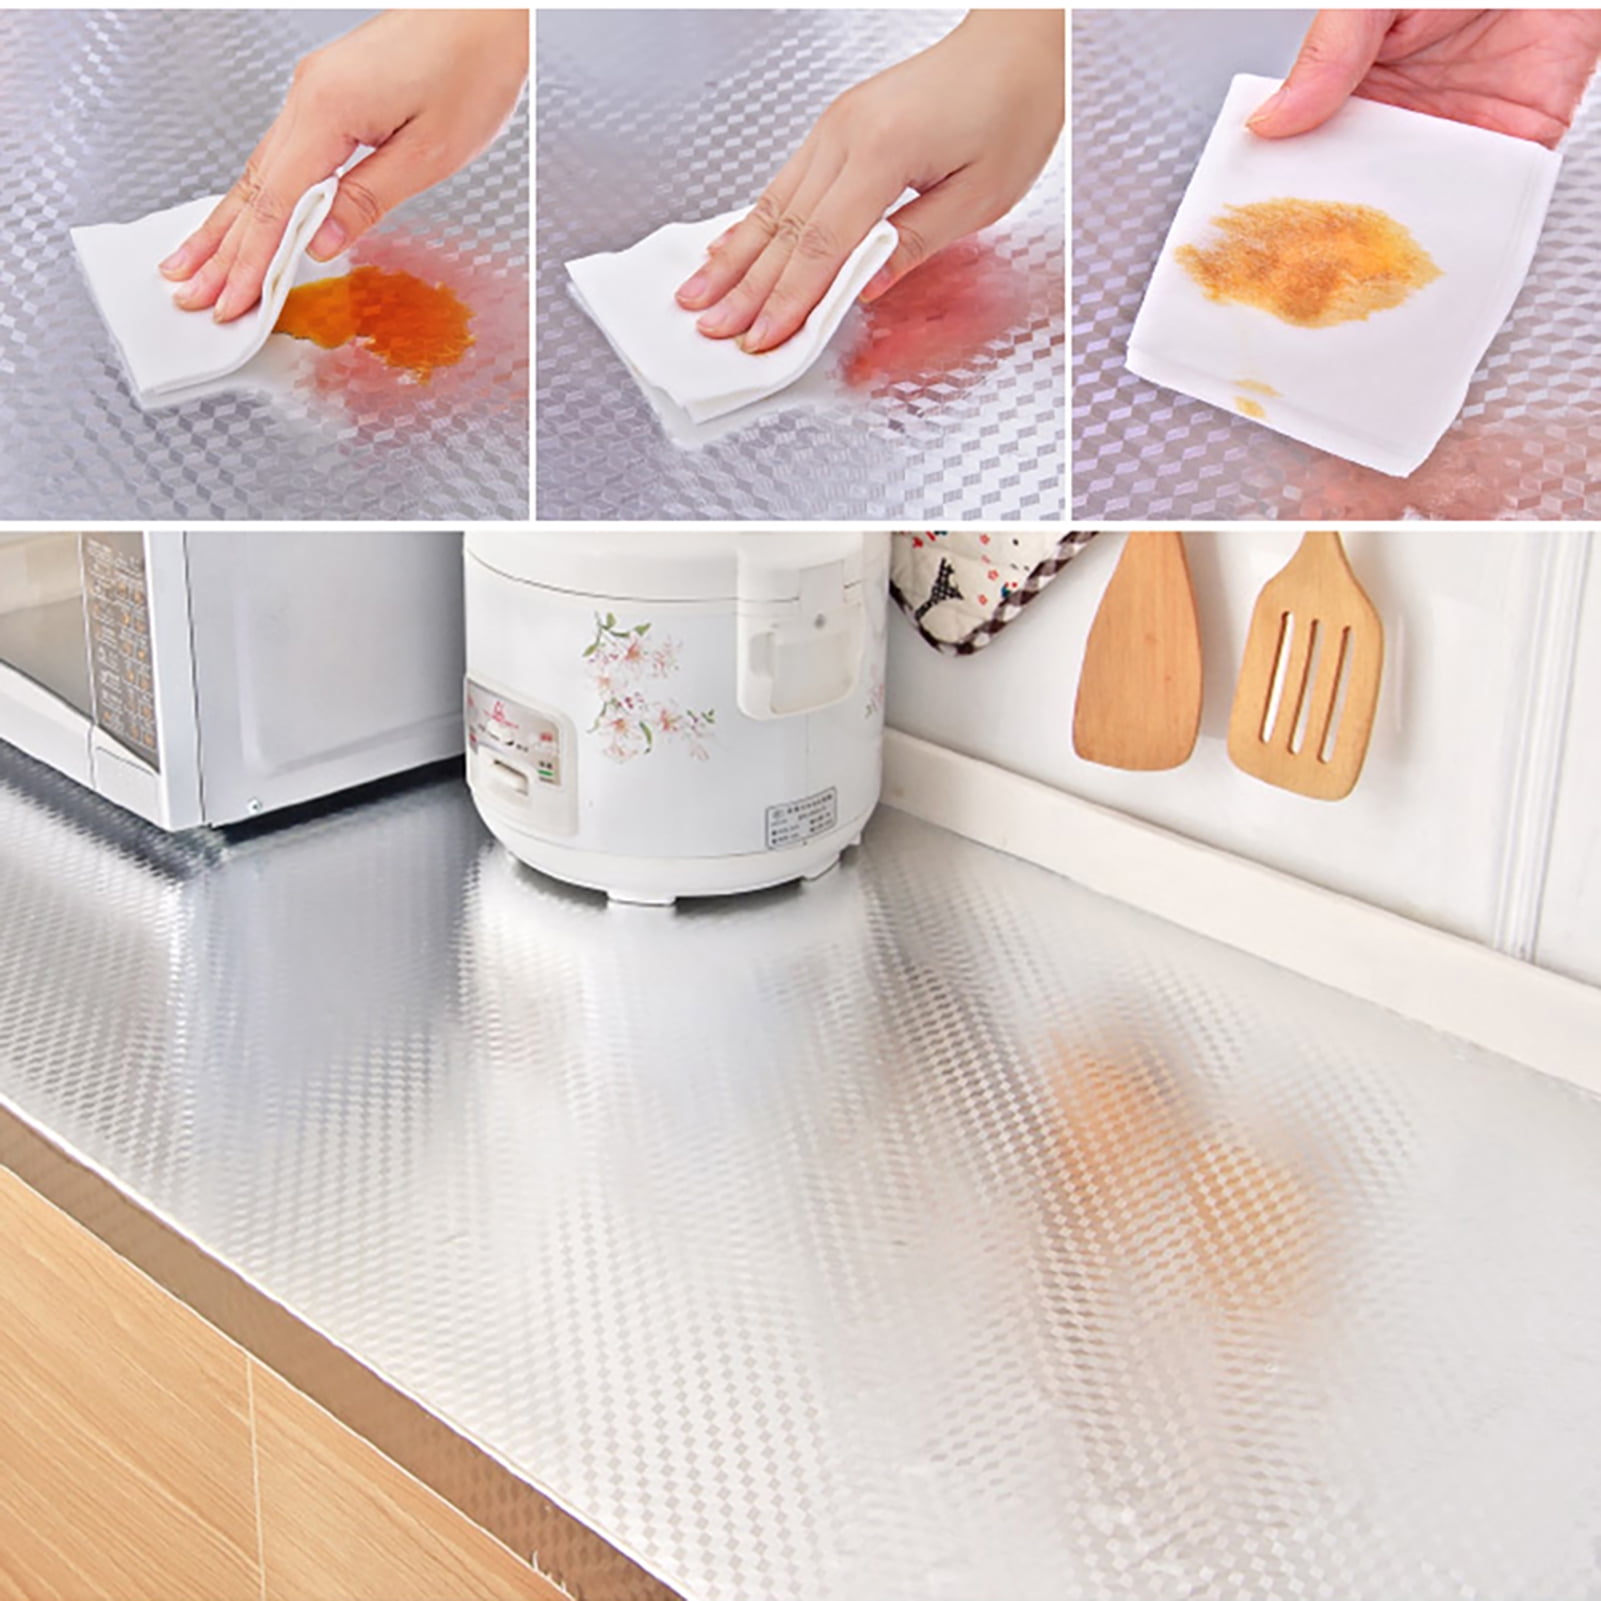 Home Kitchen Waterproof Oil Proof PVC Foil Self Adhesive Wall Cabinet Sticker